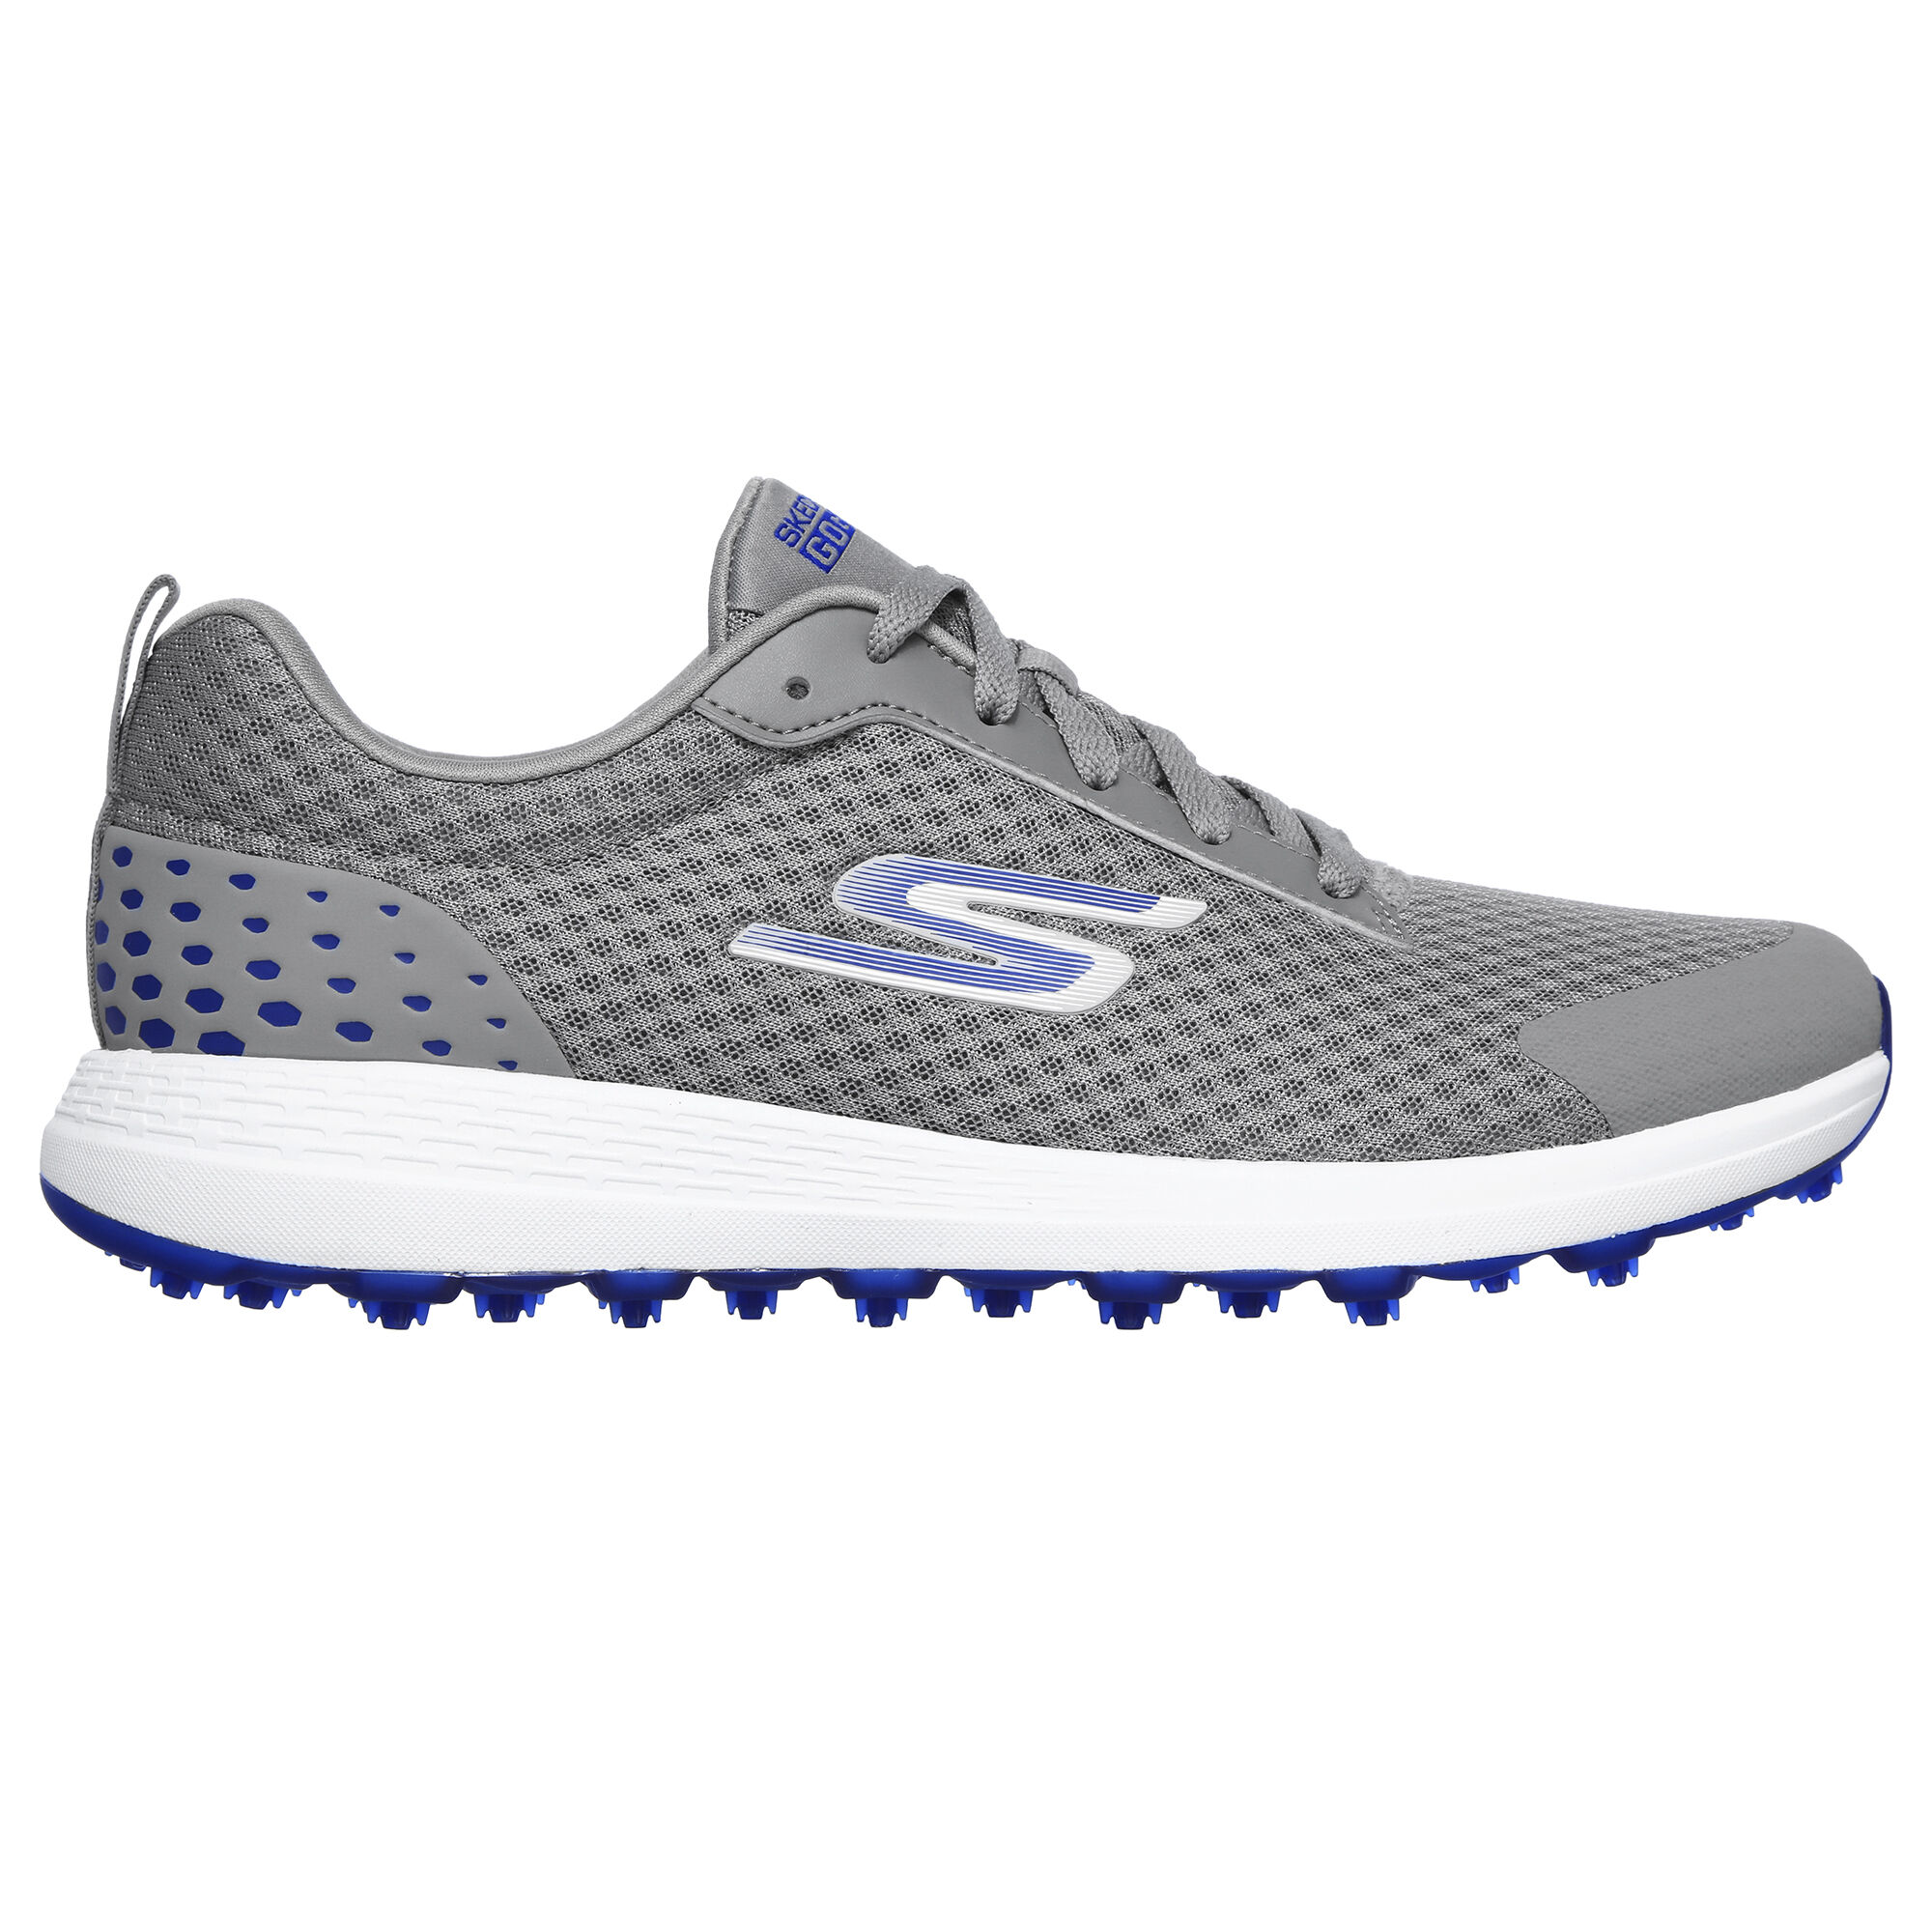 skechers go golf extra wide Sale,up to 